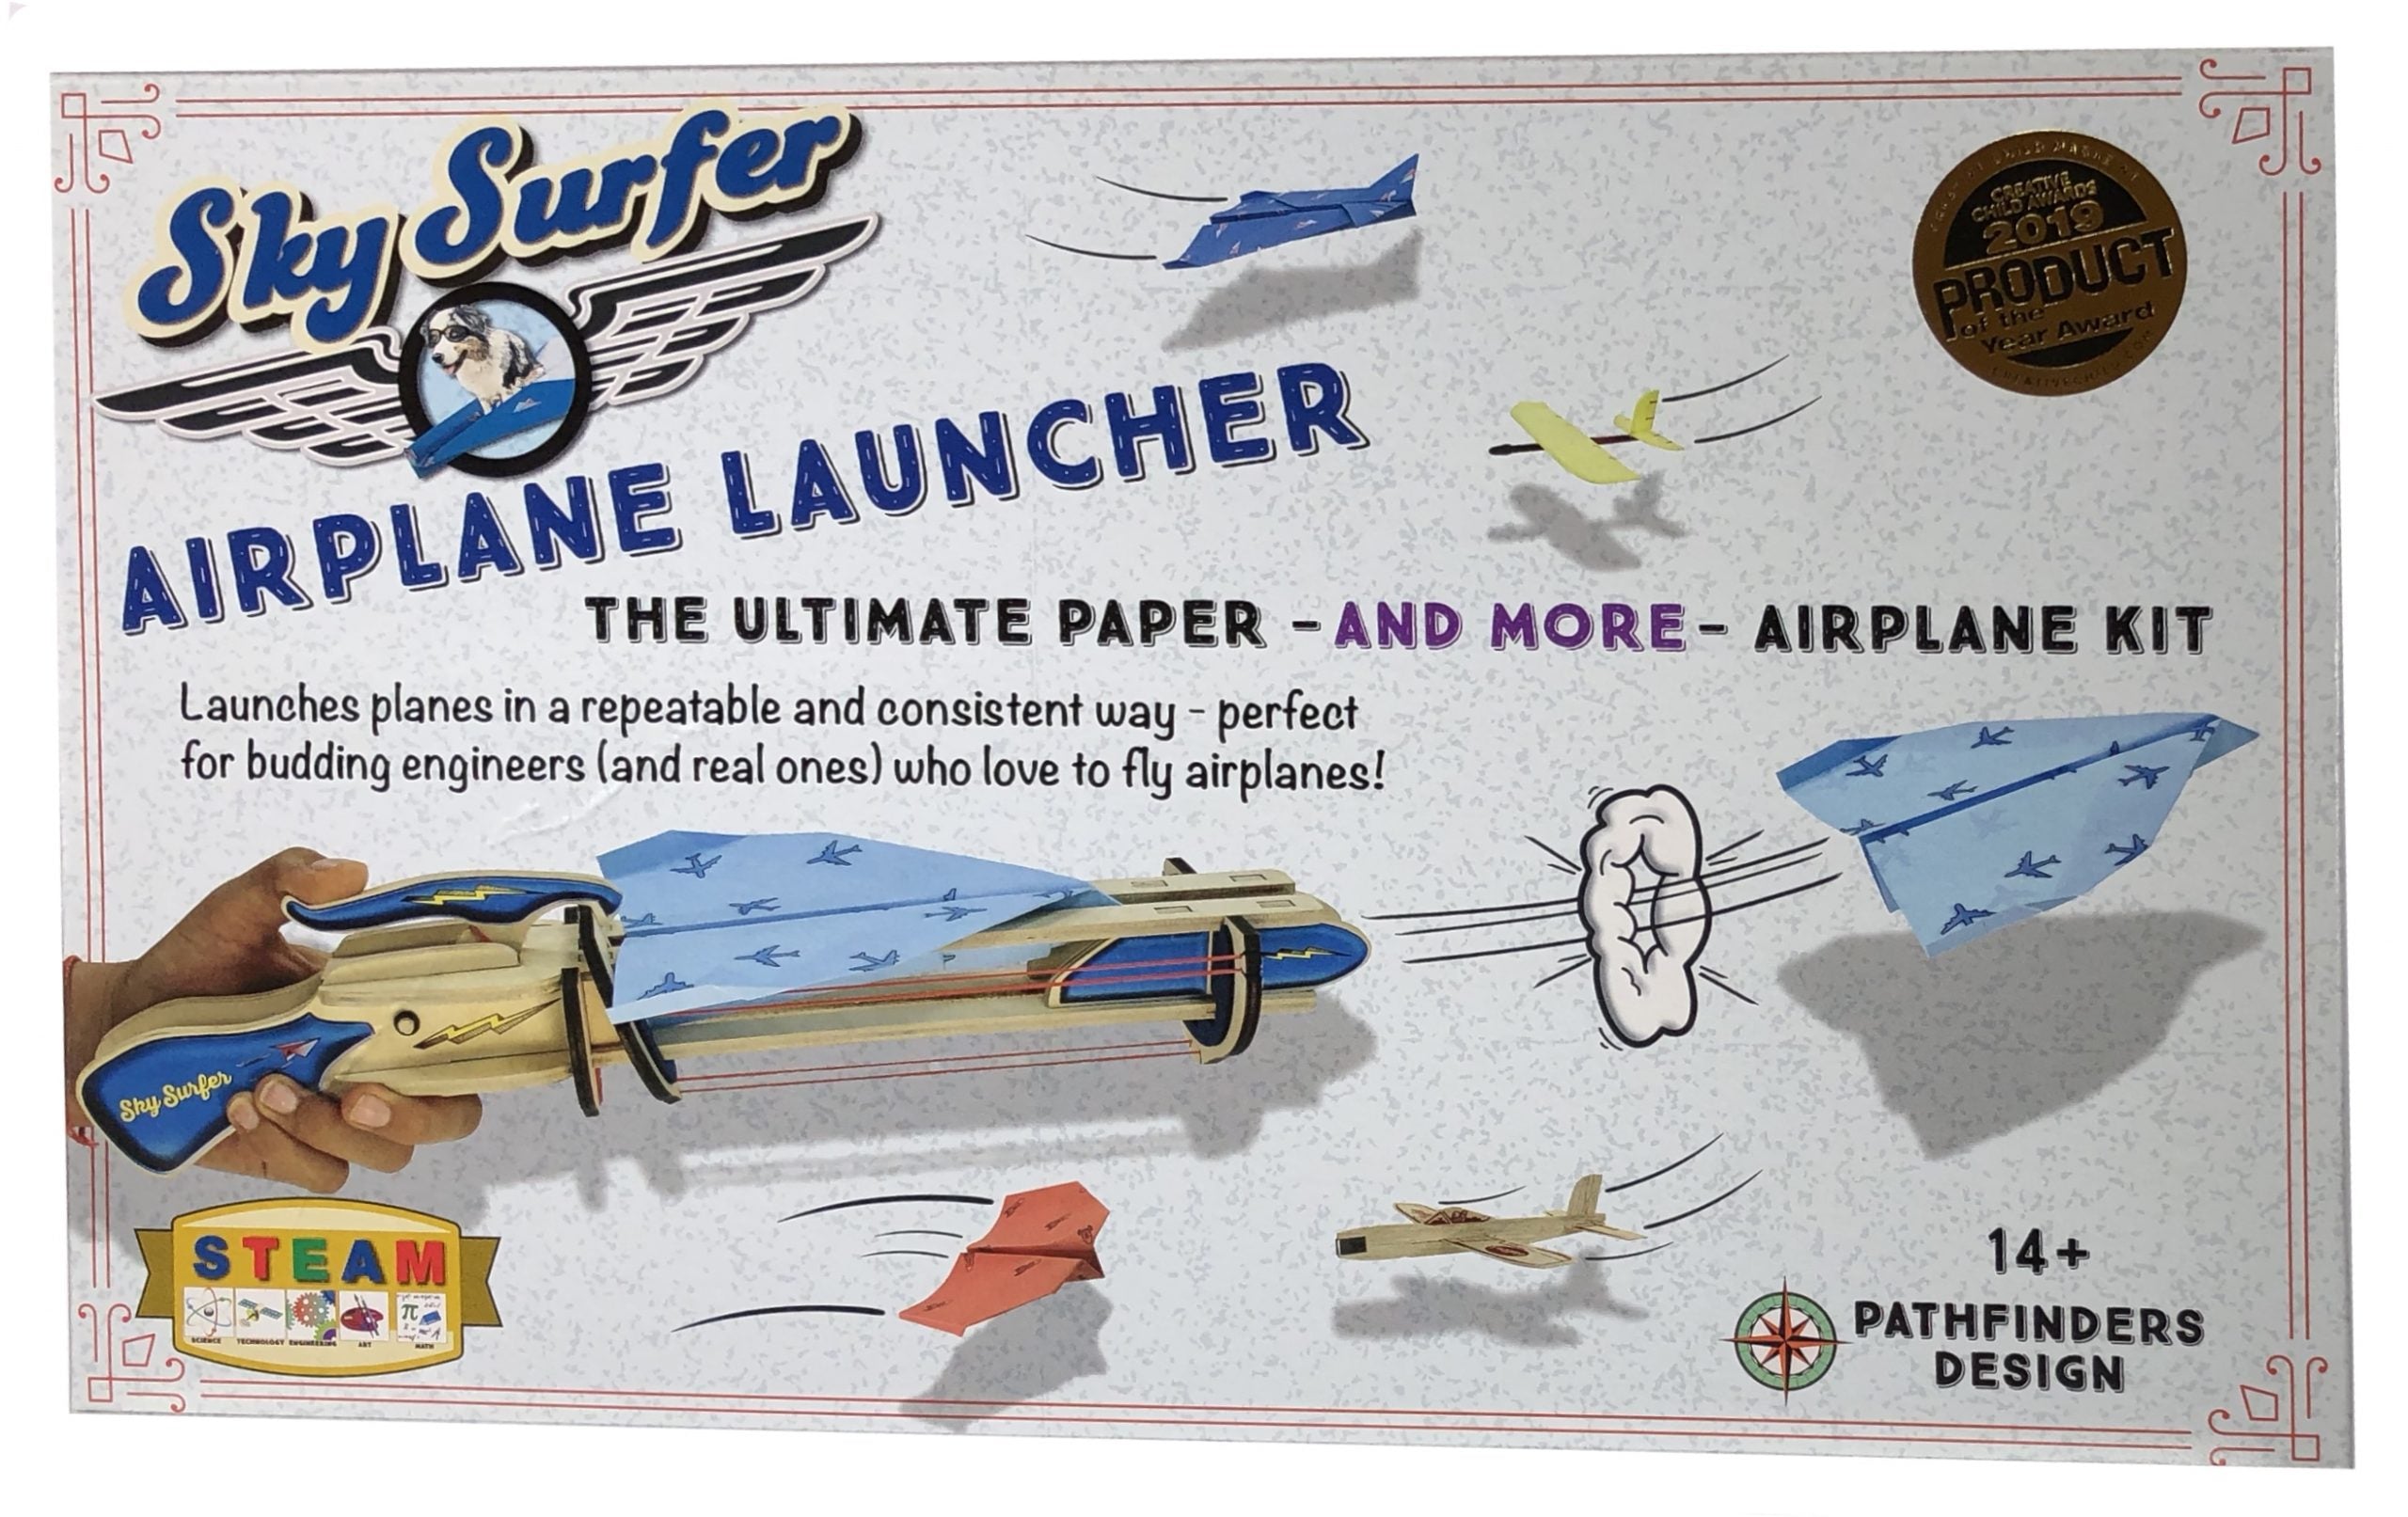 Sky Surfer Paper Airplane Launcher